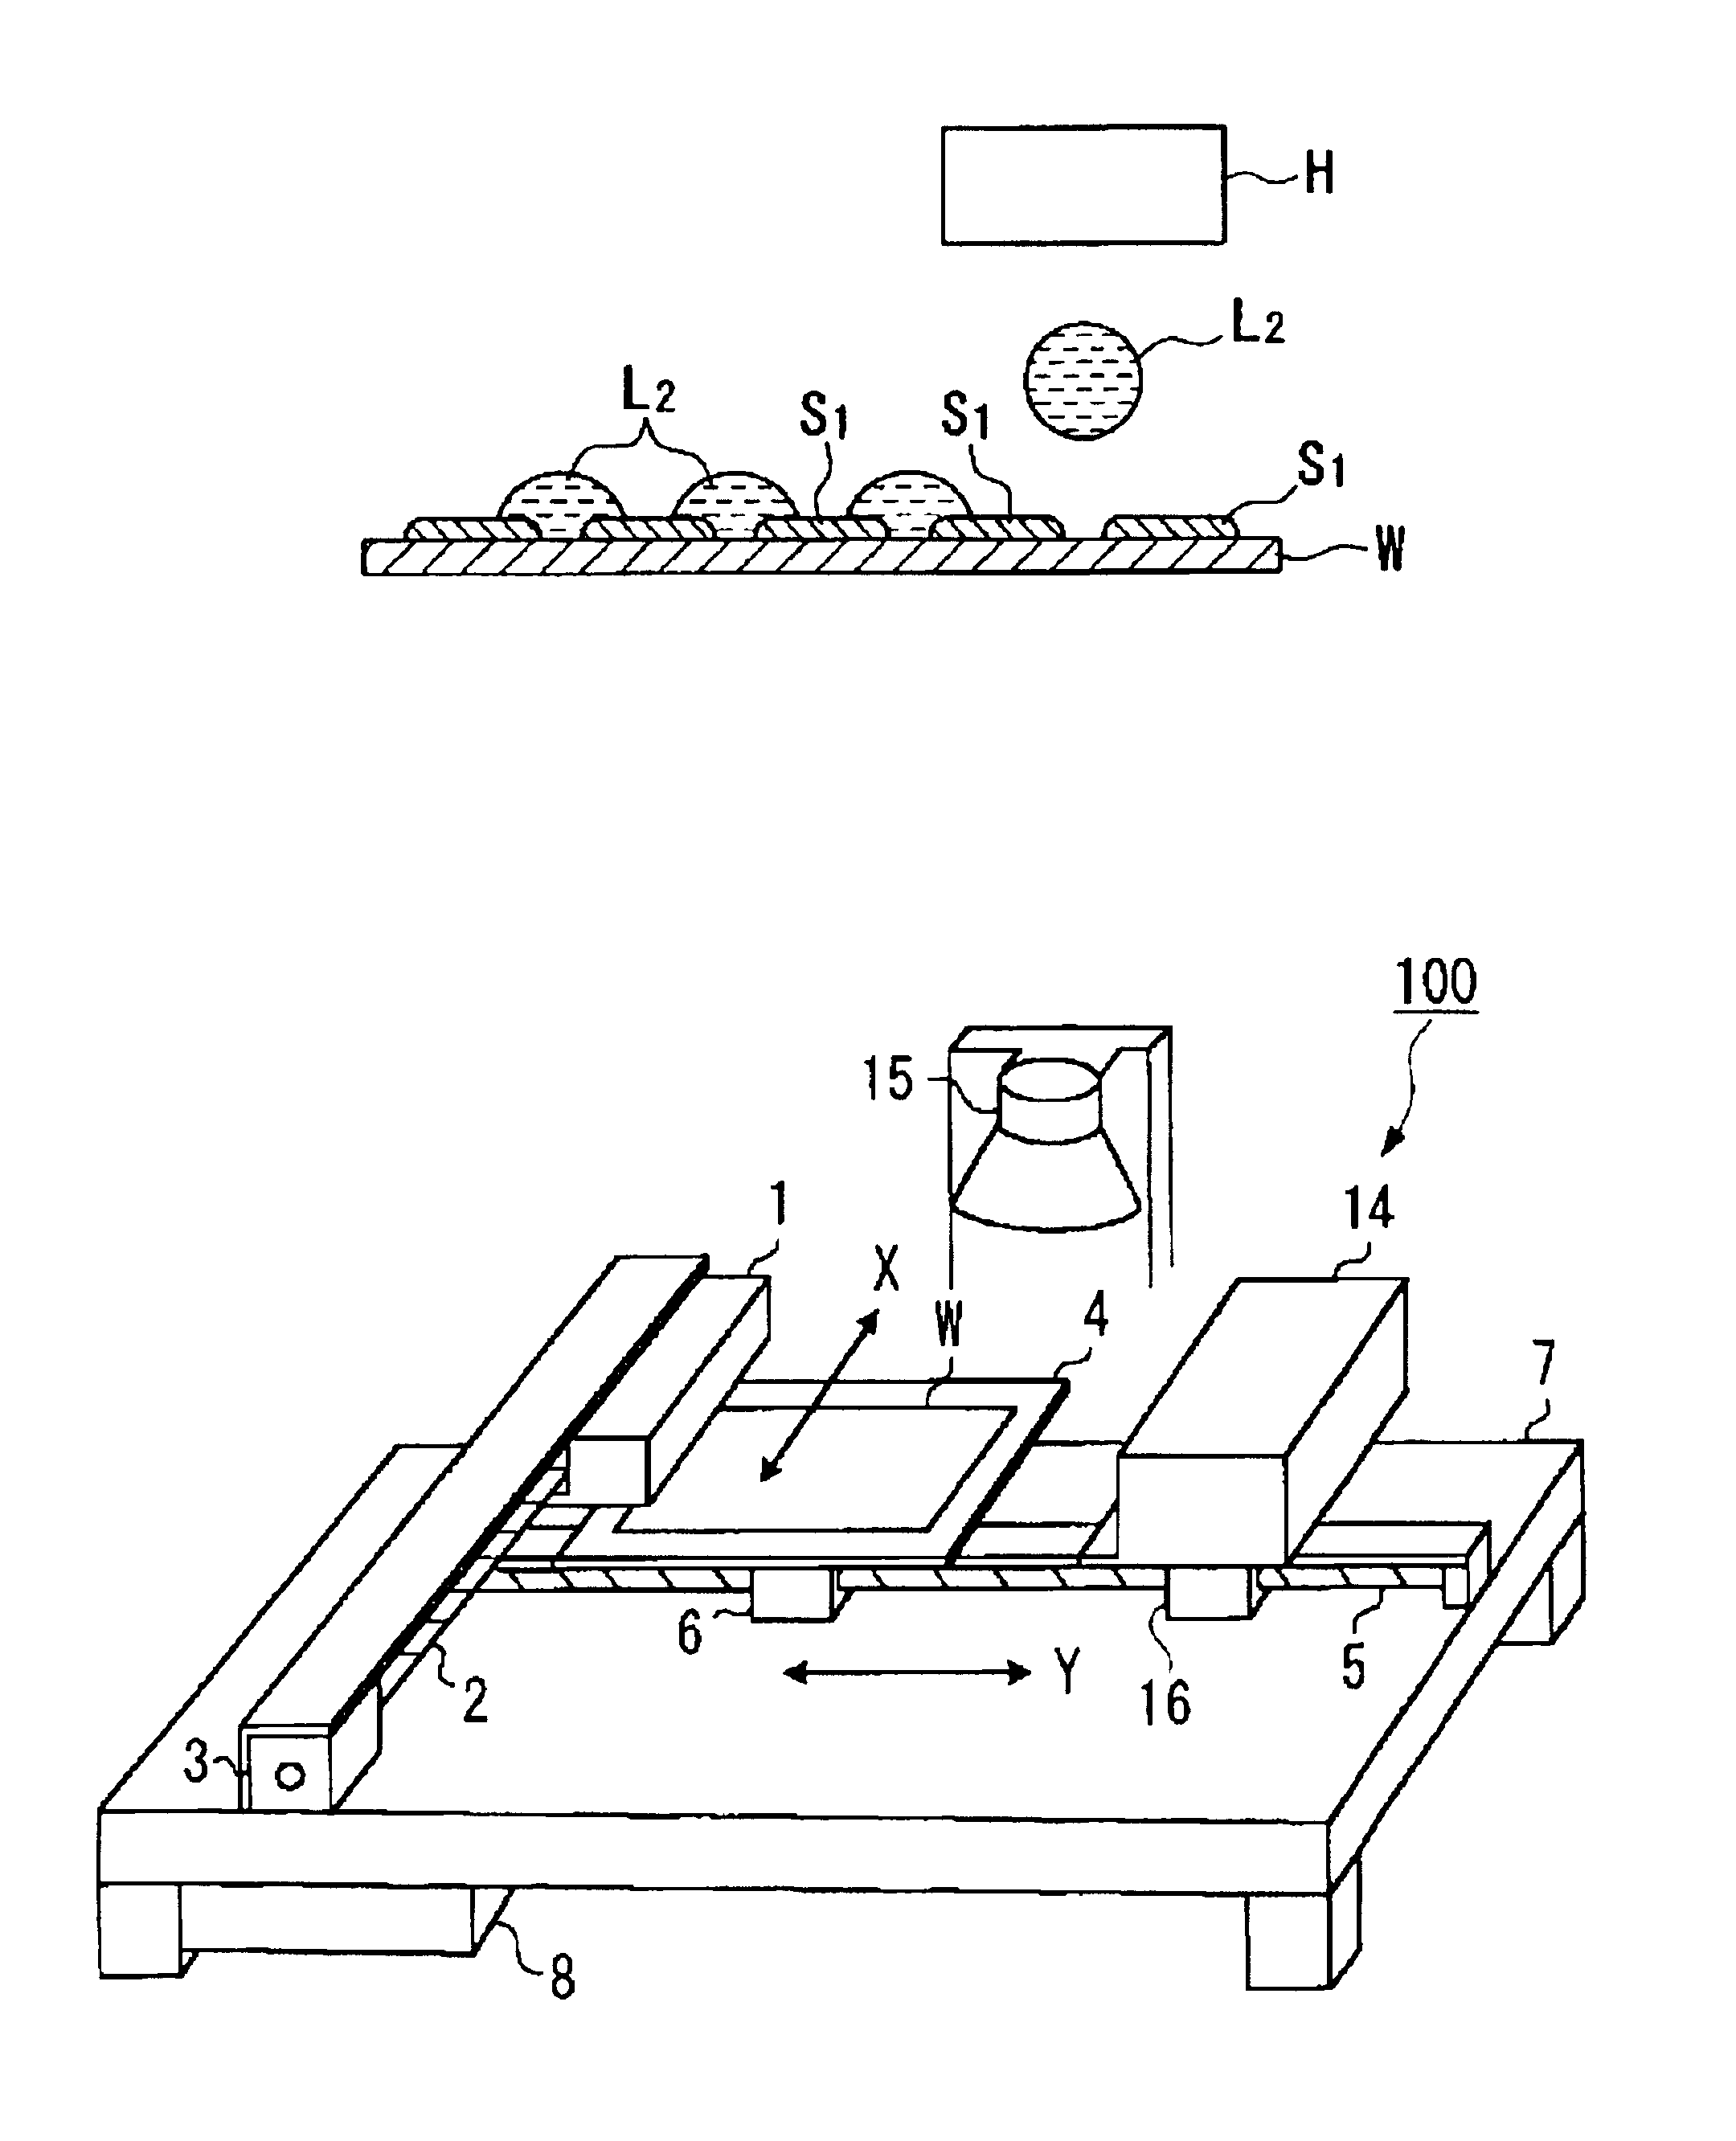 Apparatus and methods for forming film pattern